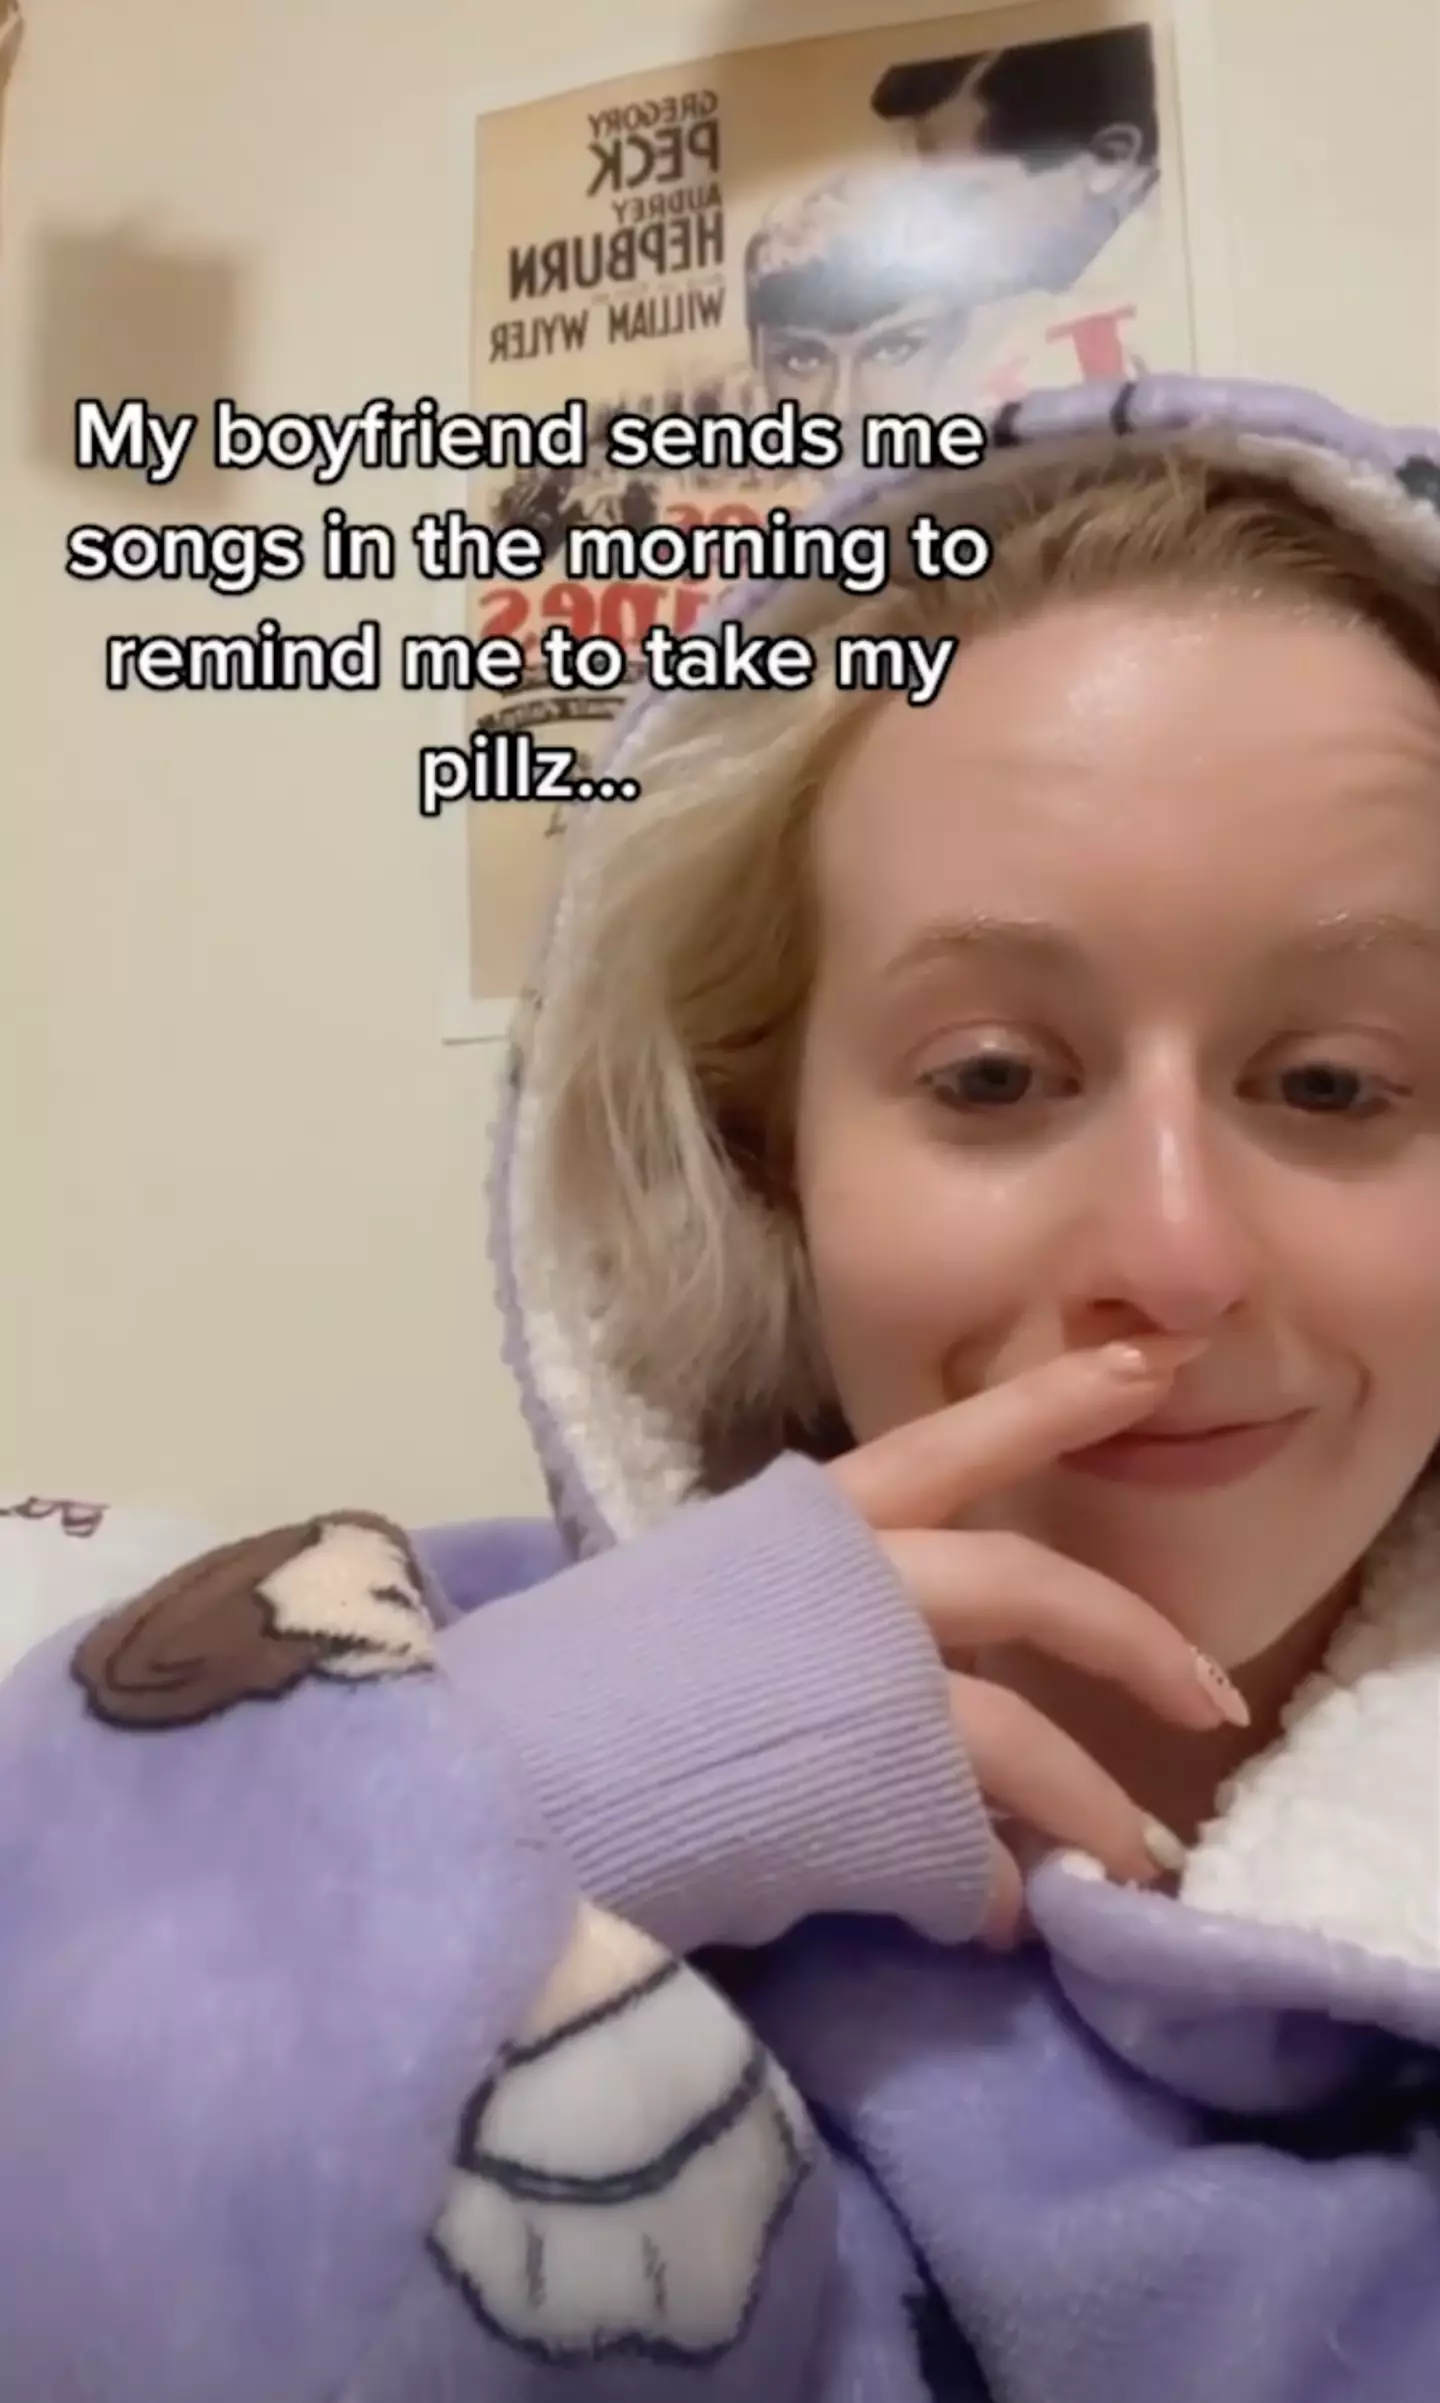 Amy-Beth's boyfriend has come up with an adorable way to help remind her to take her pills.